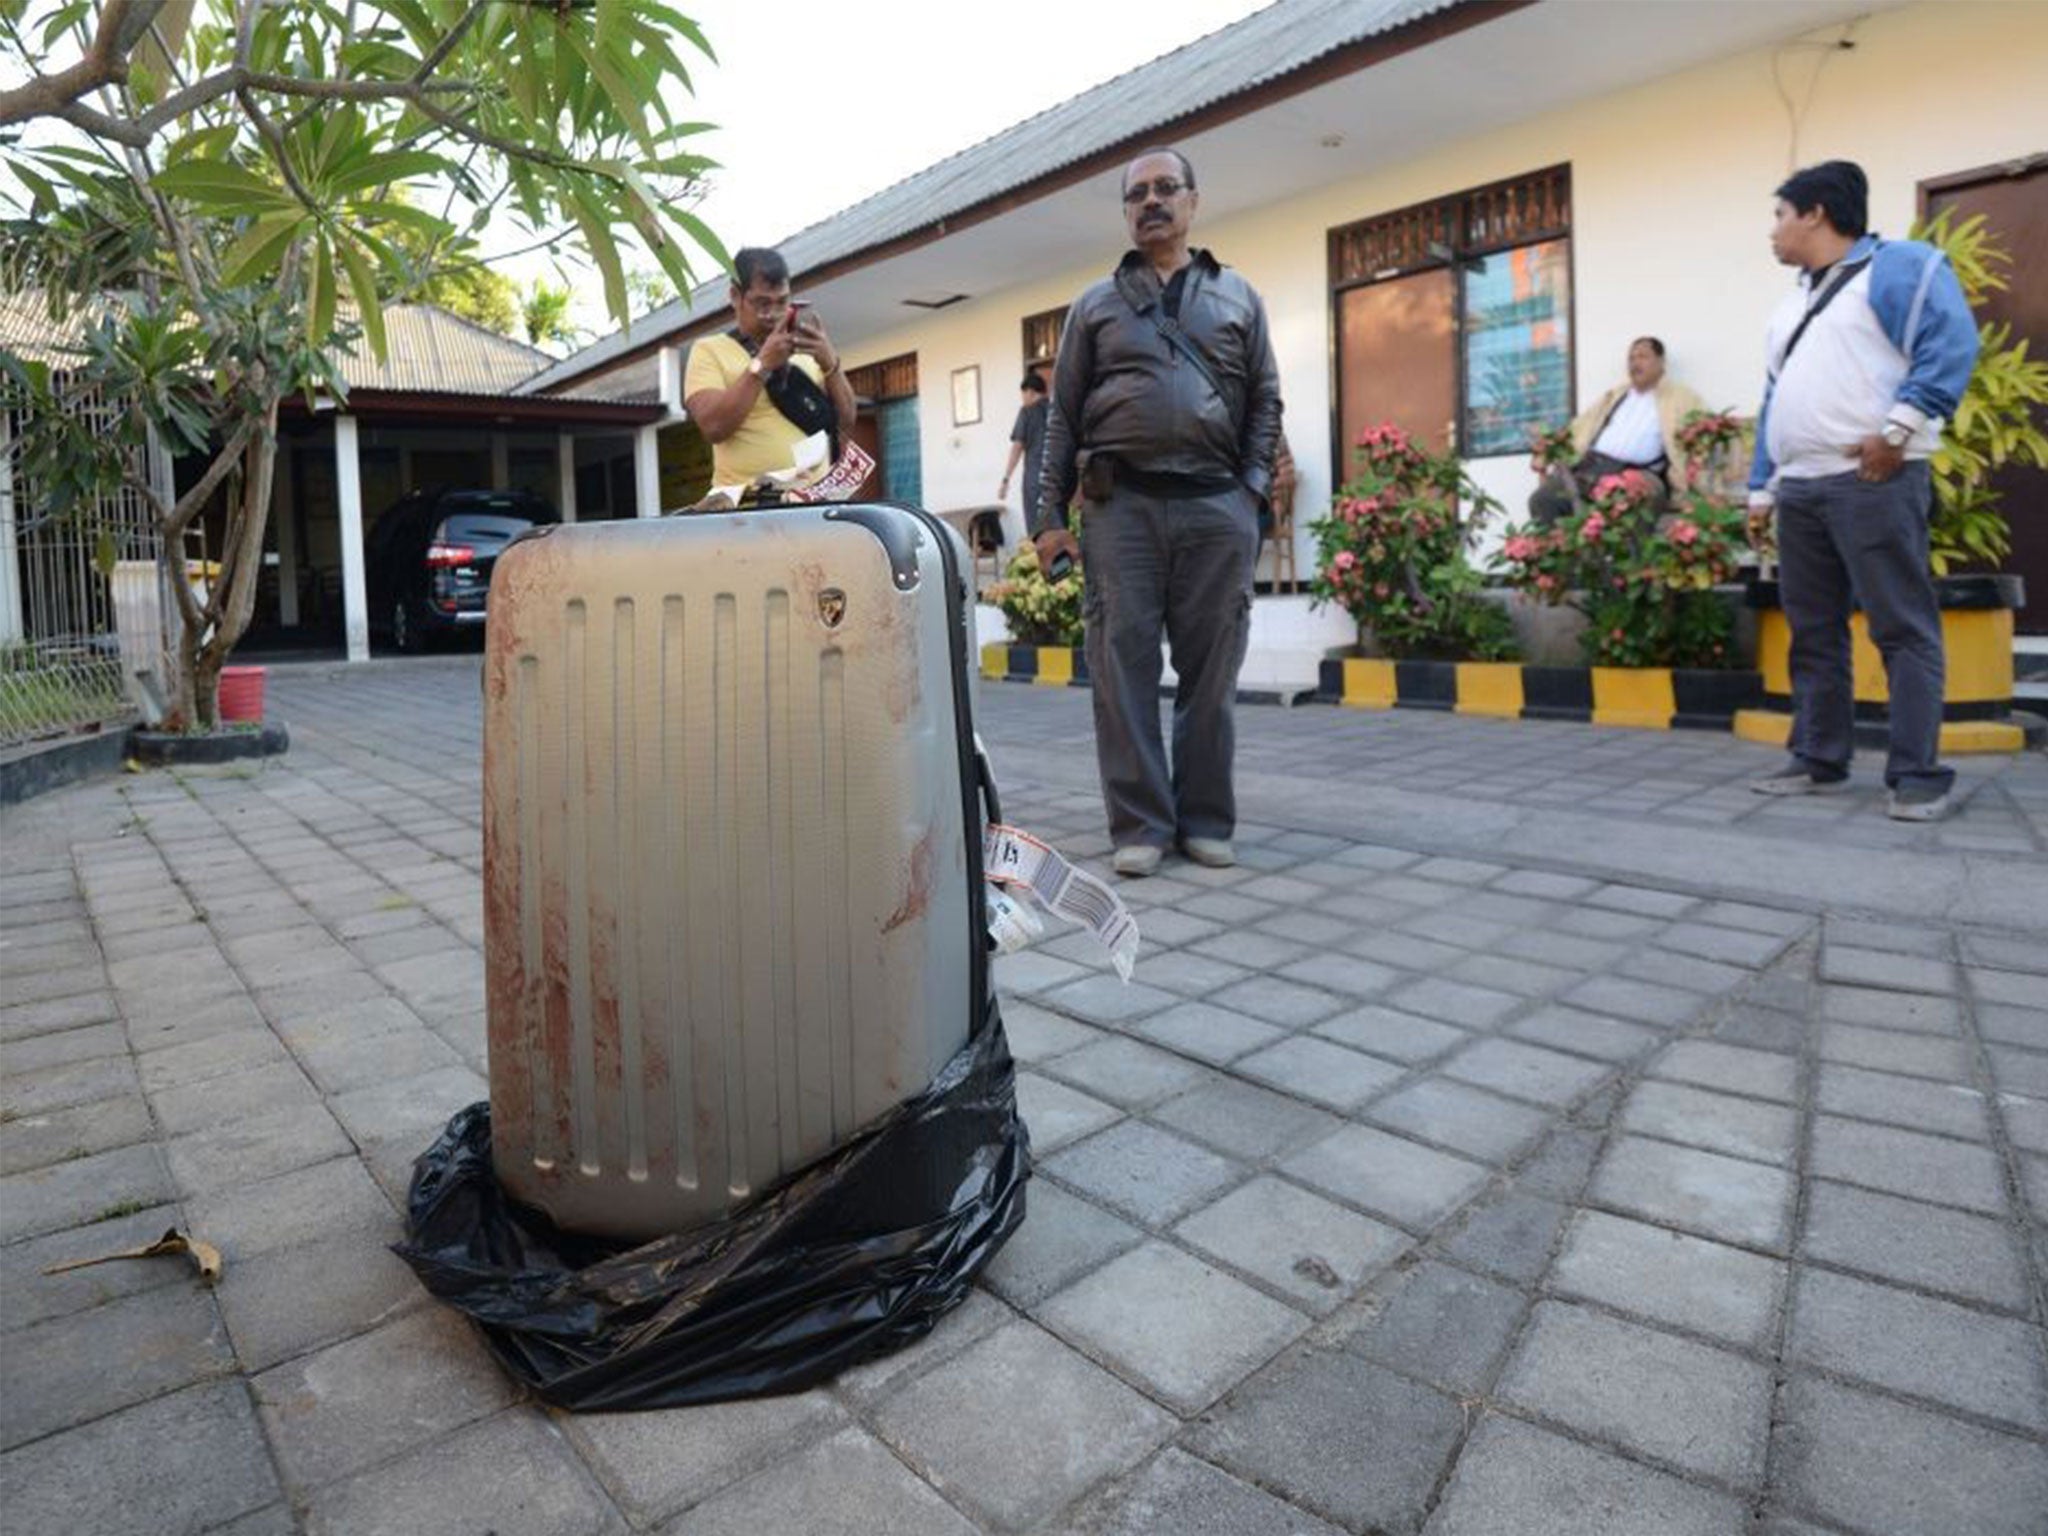 The suitcase in Bali where the body of a woman was found inside